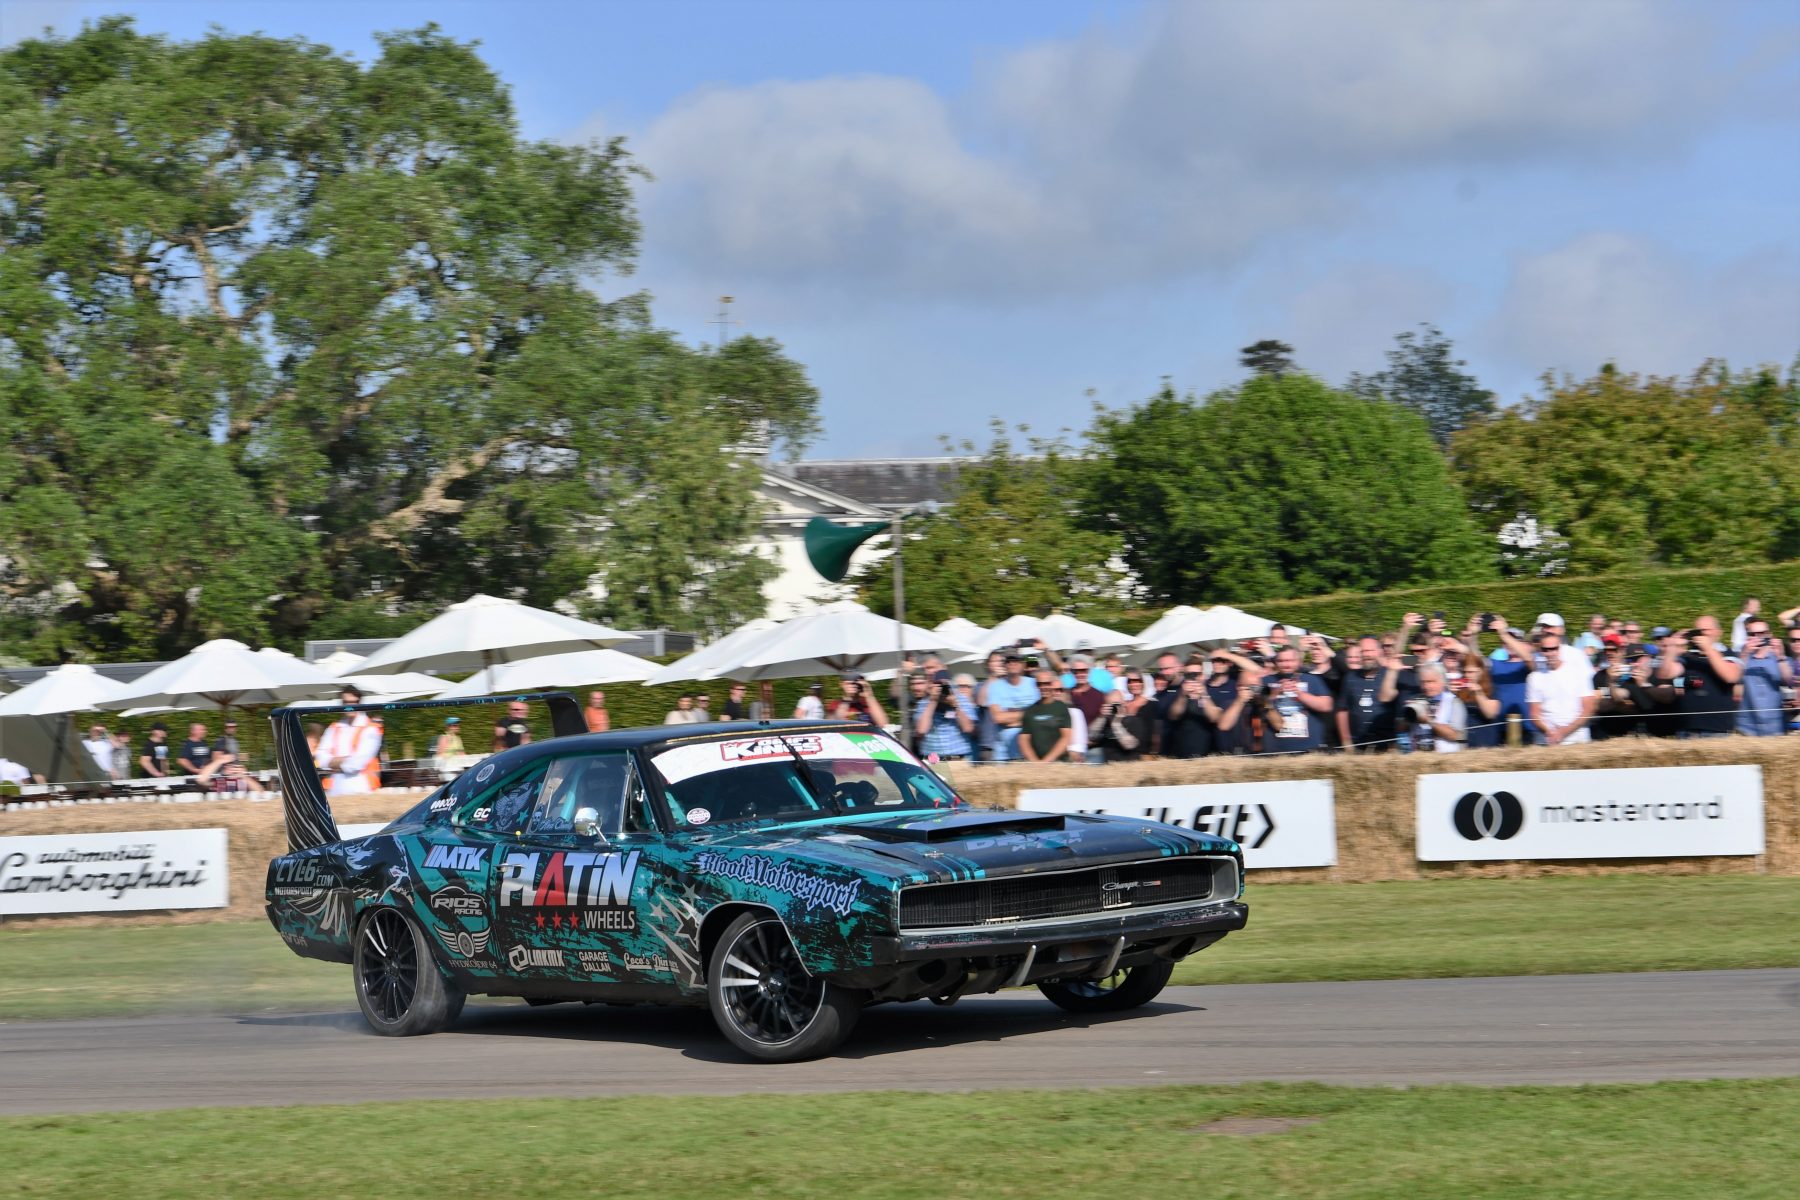 1968 Dodge Charger drift car at the 2022 Goodwood Festival of